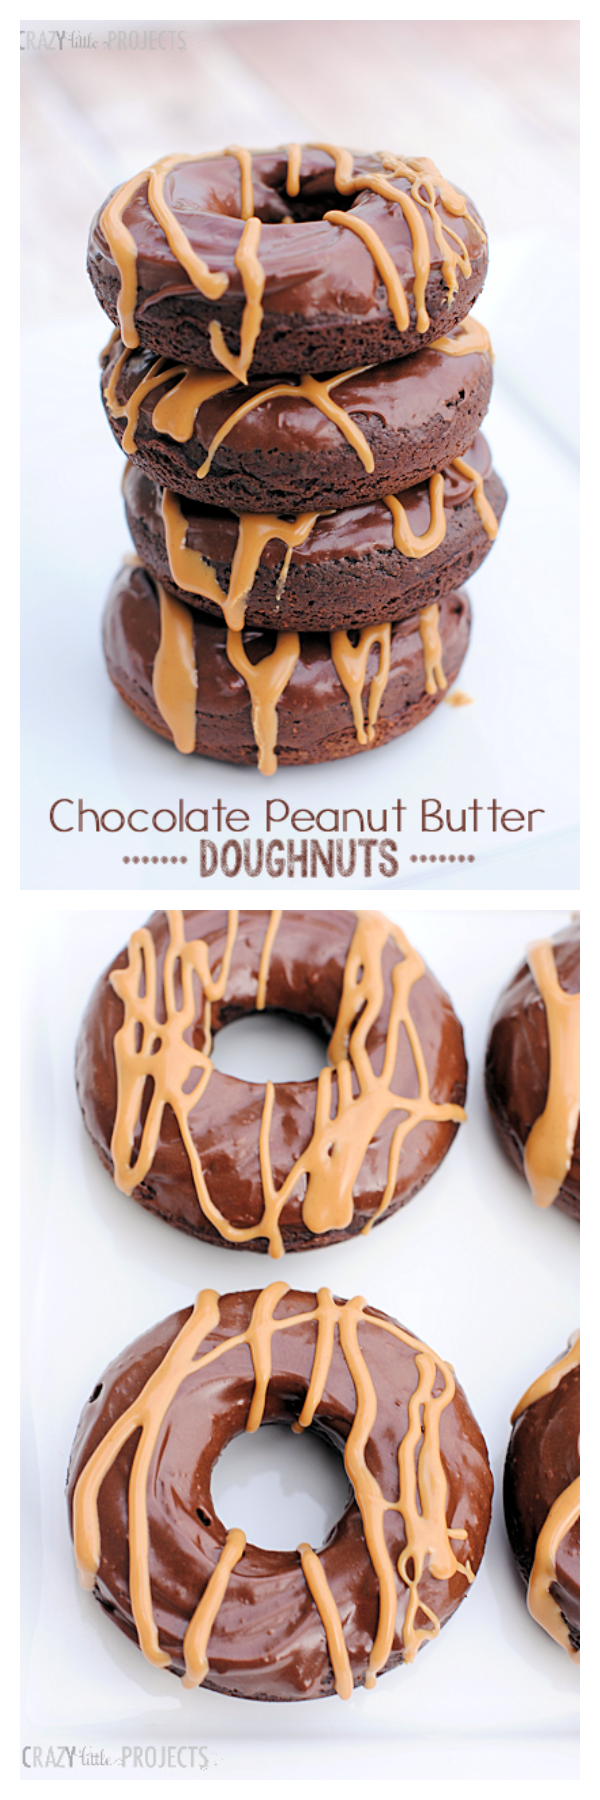 Chocolate Peanut Butter Doughnuts...so AMAZING! This baked donut recipe is easy to make and fun to eat and tastes great! Chocolate and peanut butter are always a good combination! #donuts #donut #chocolate #dessert #dessertrecipes